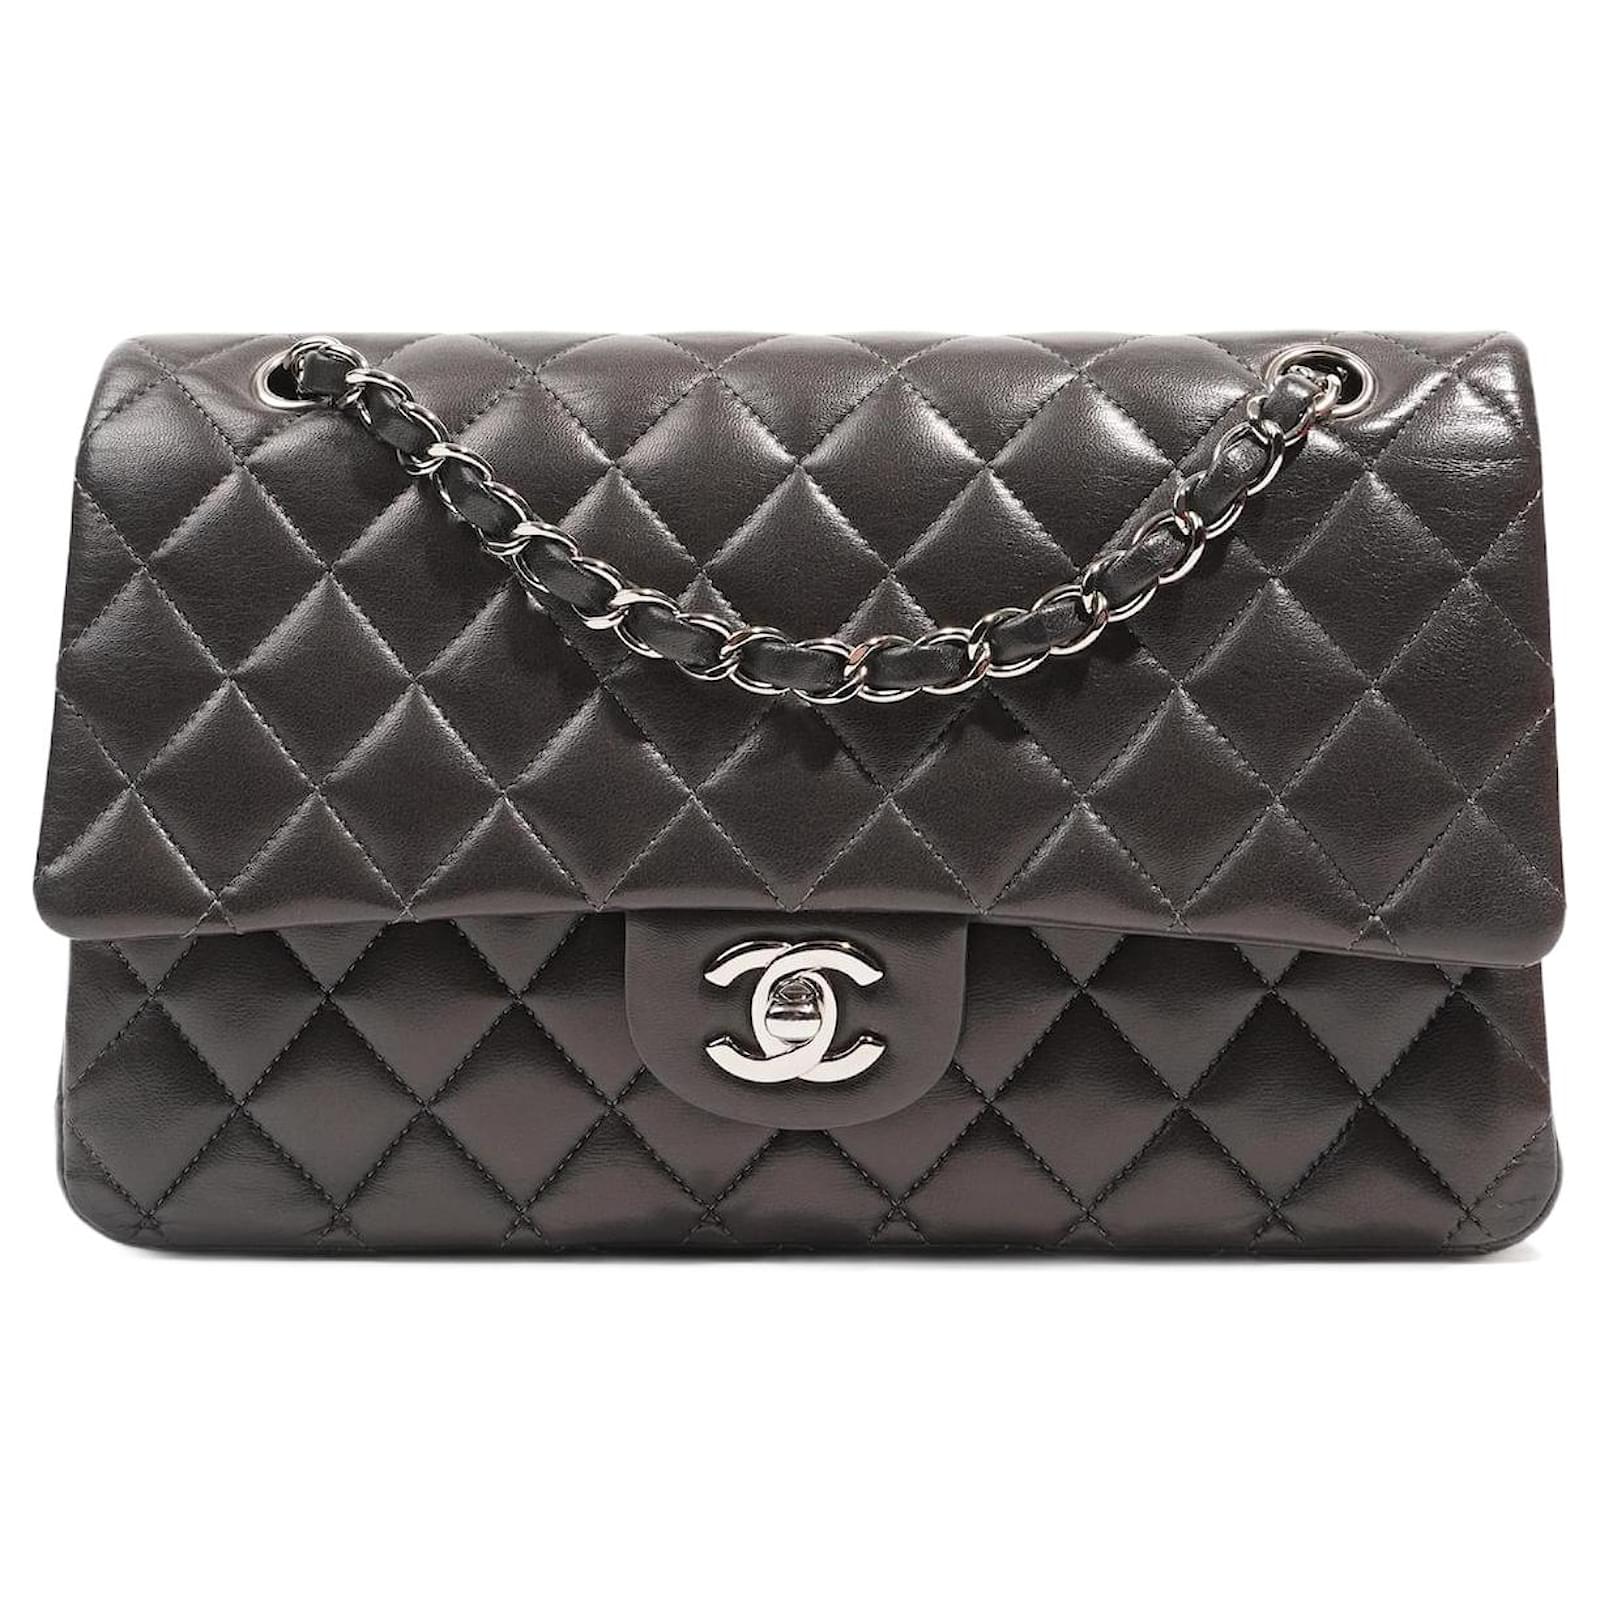 2012 Chanel Red, Black and White Quilted Lambskin Classic Single Flap Bag